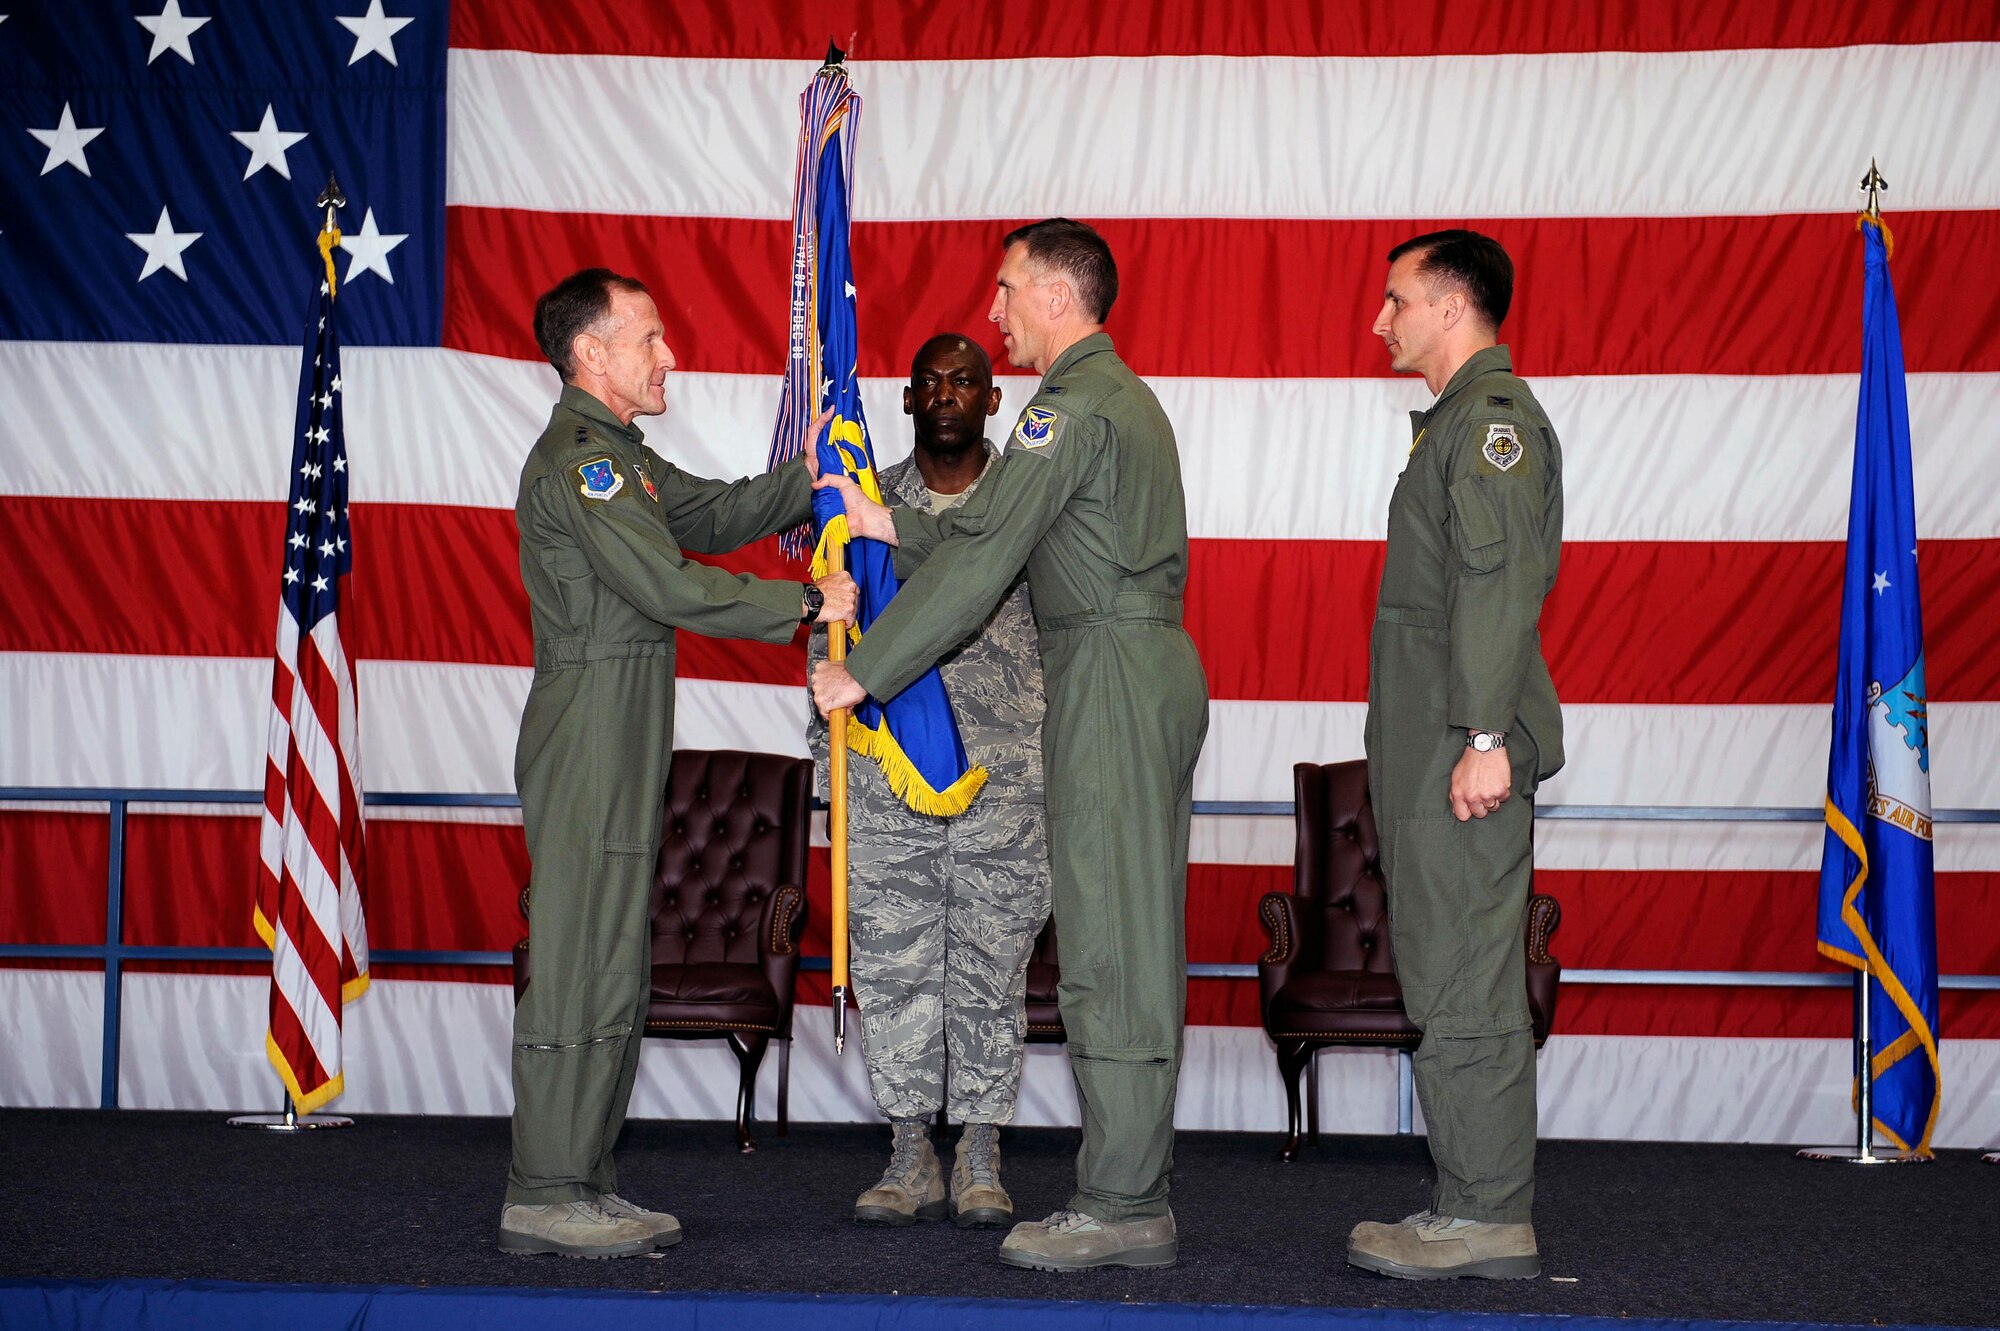 Col. Scott Vander Hamm, outgoing 28th Bomb Wing commander, hands the guidon to Lt. Gen. Norman Seip, 12th Air Force commander, during the change of command ceremony here, June 4. The handing off of the guidon symbolizes Col. Vander Hamm relinquishing command to the incoming 28 BW commander Col. Jeffrey Taliaferro. (U.S. Air Force photo by Airman 1st Class Corey Hook)